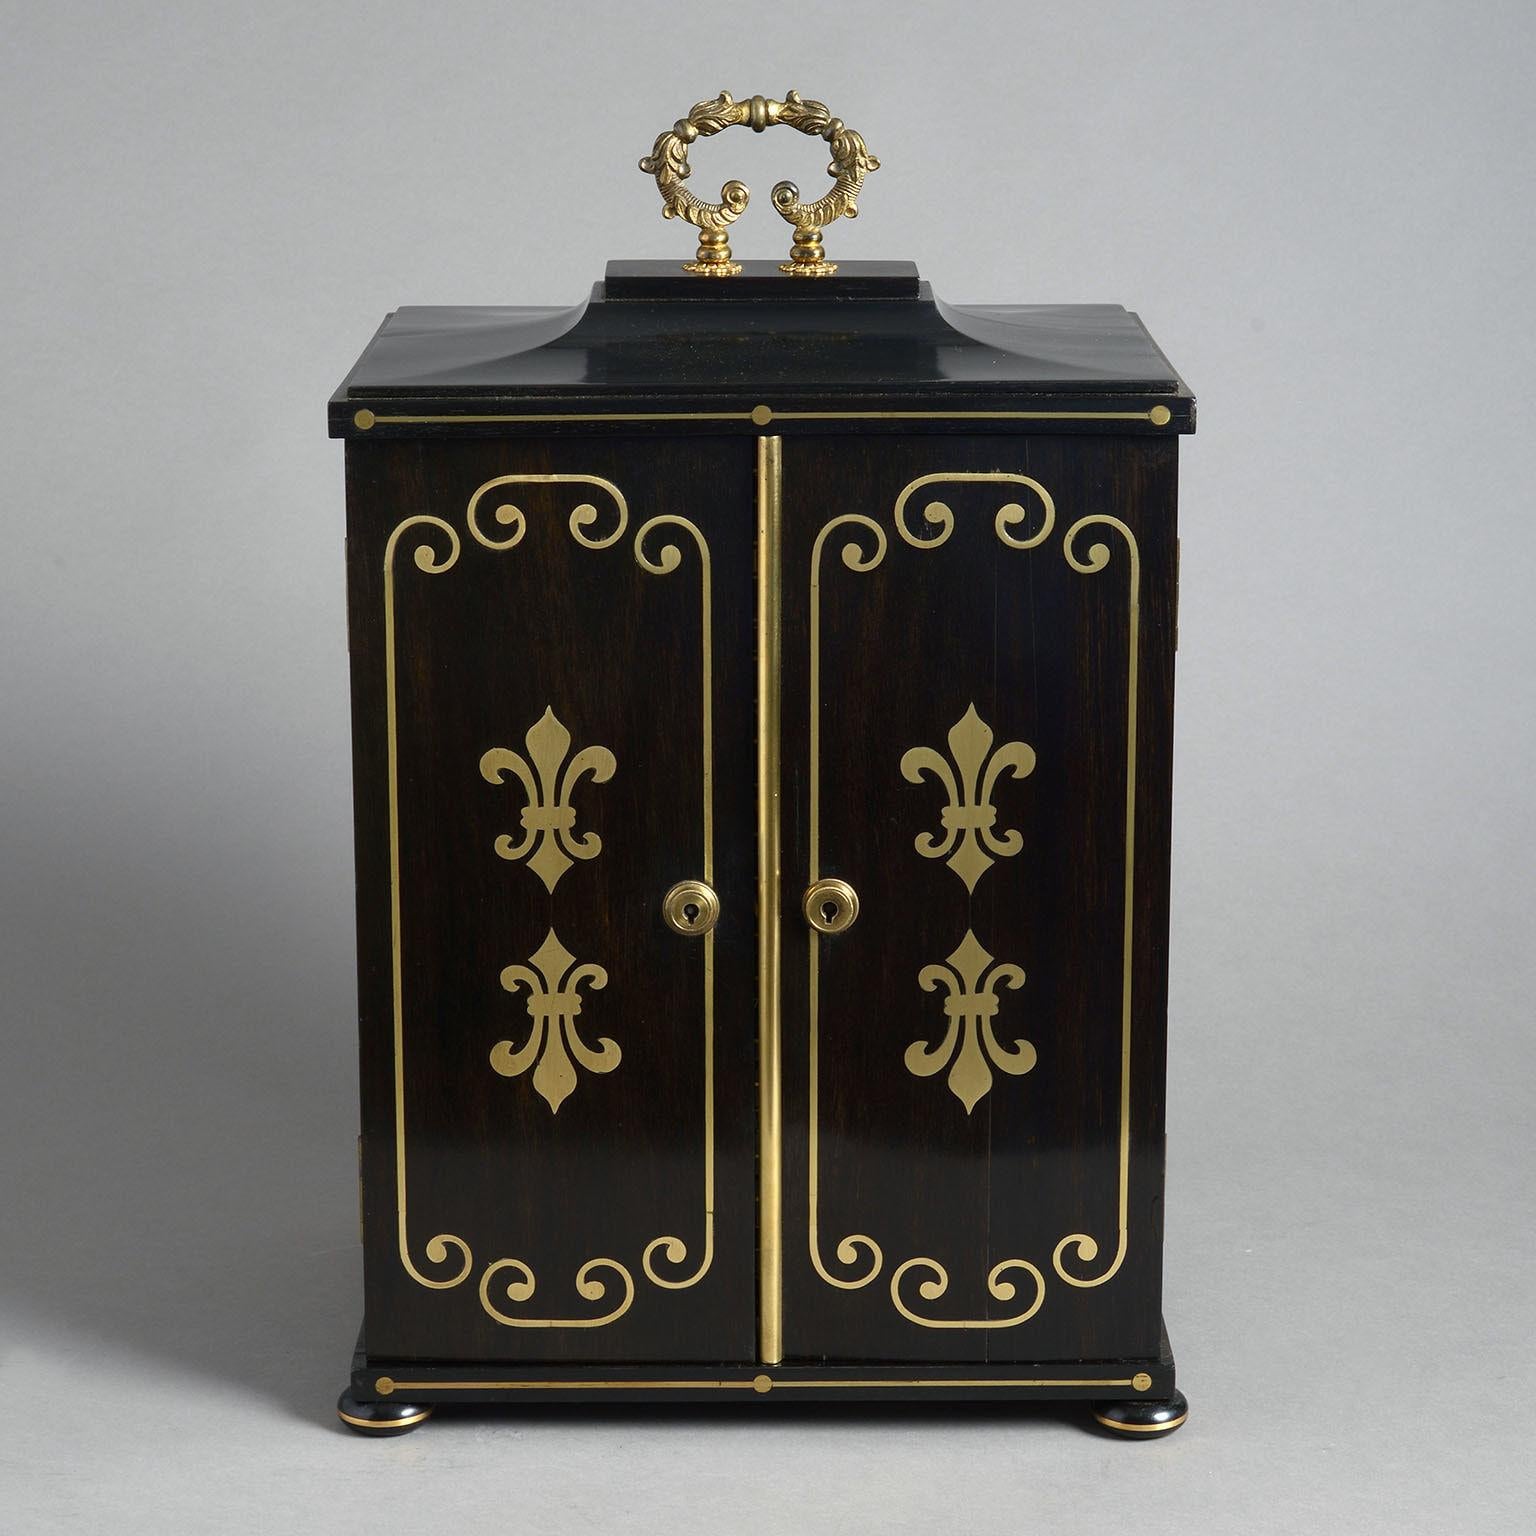 A regency ebony and brass inlaid collector’s cabinet constructed in a combination of solid ebony and veneered ebony over a mahogany substrate and decorated on all sides with brass inlay. 

The pair of doors with original Bramah lock opening to